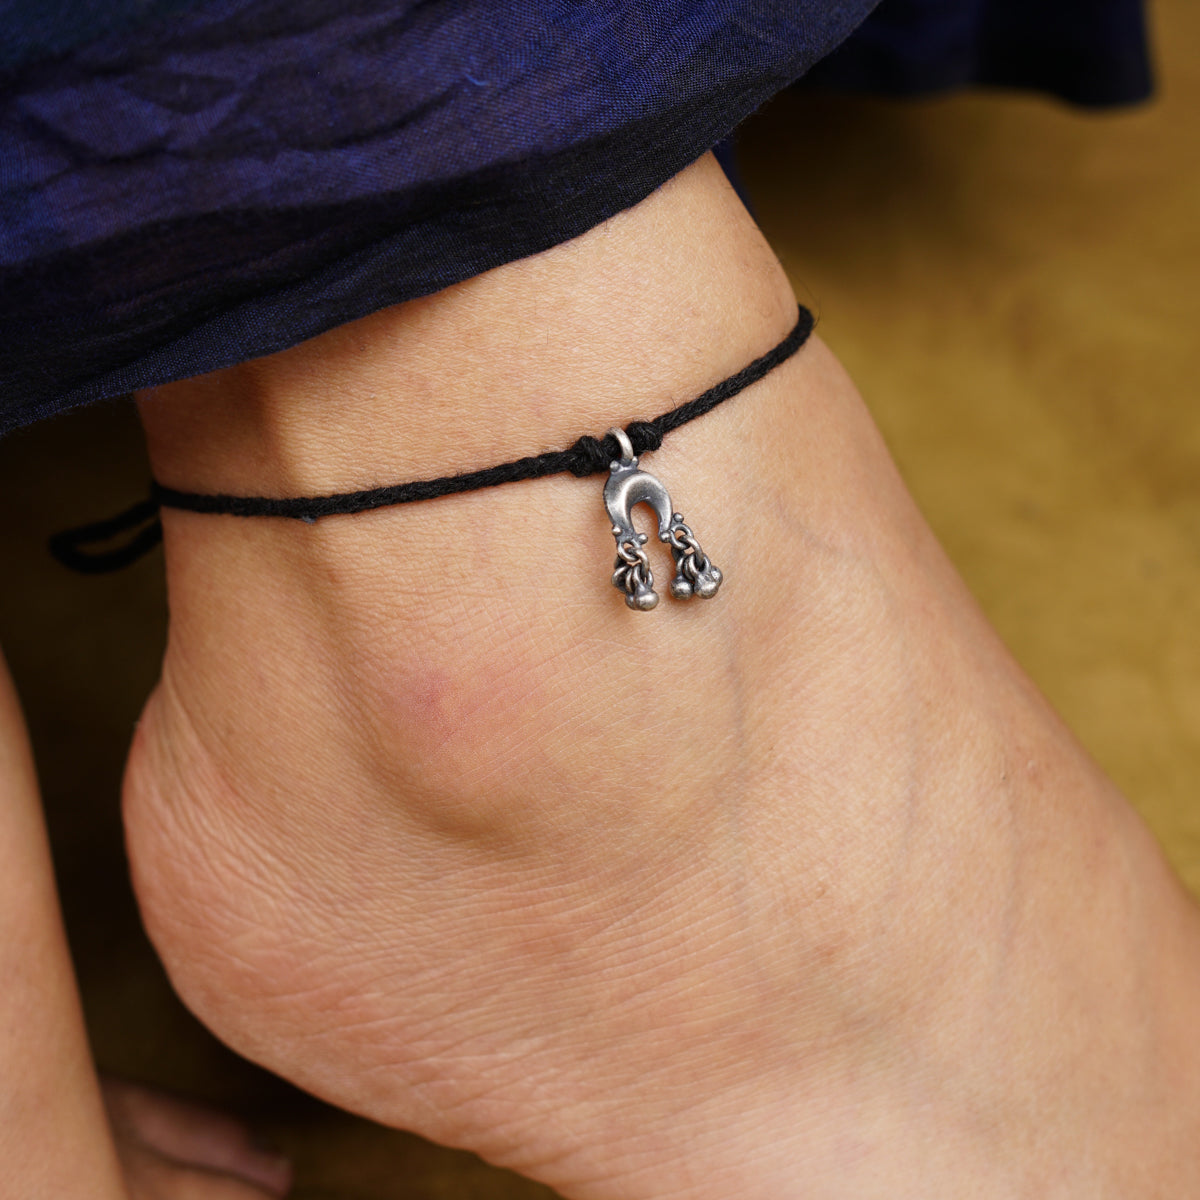 a close up of a person's foot wearing a bracelet